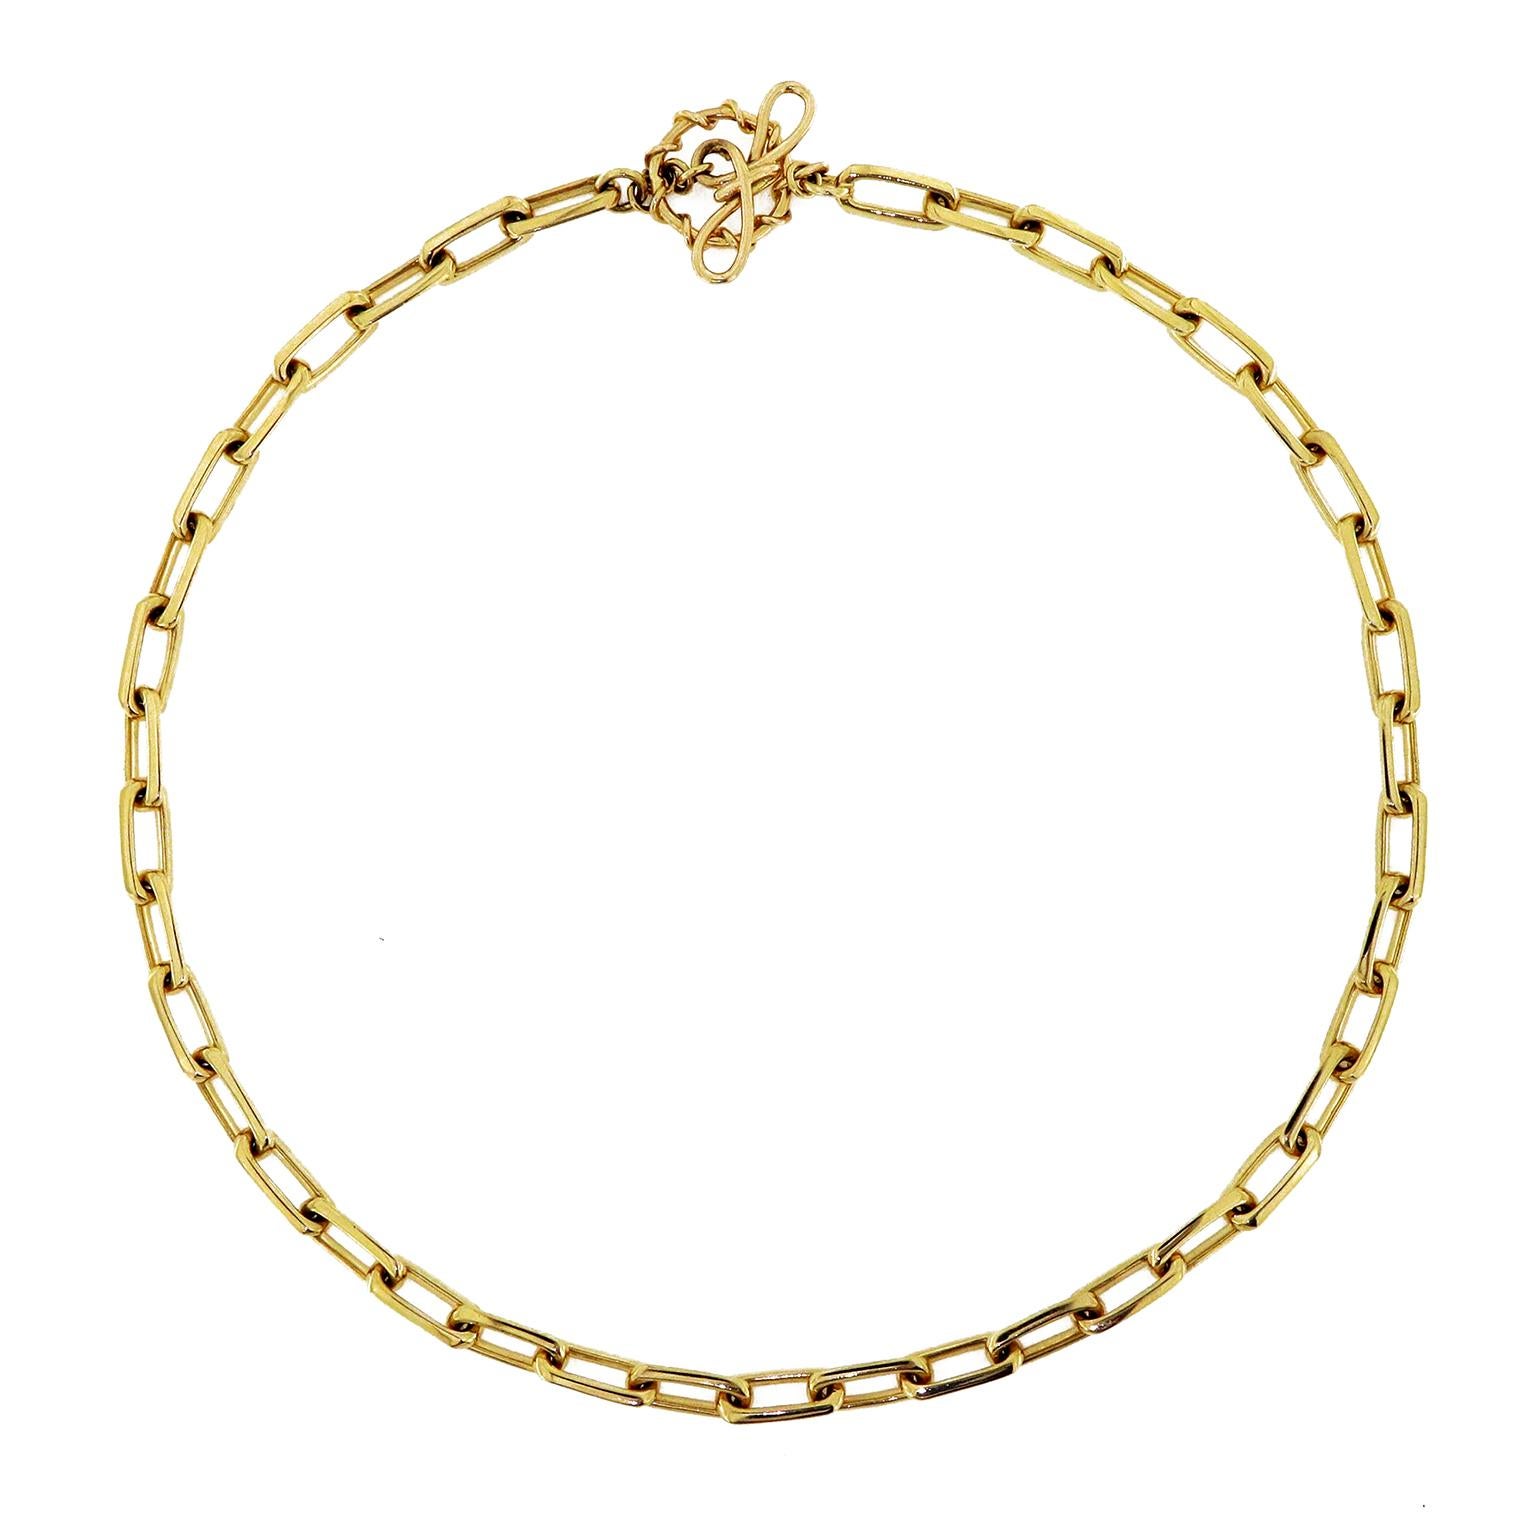 18k yellow gold links creates an elegant radiance for this necklace, which is secured with a knot and toggle clasp. The necklace measures 17.13 inches (length) by .24 inches (width).